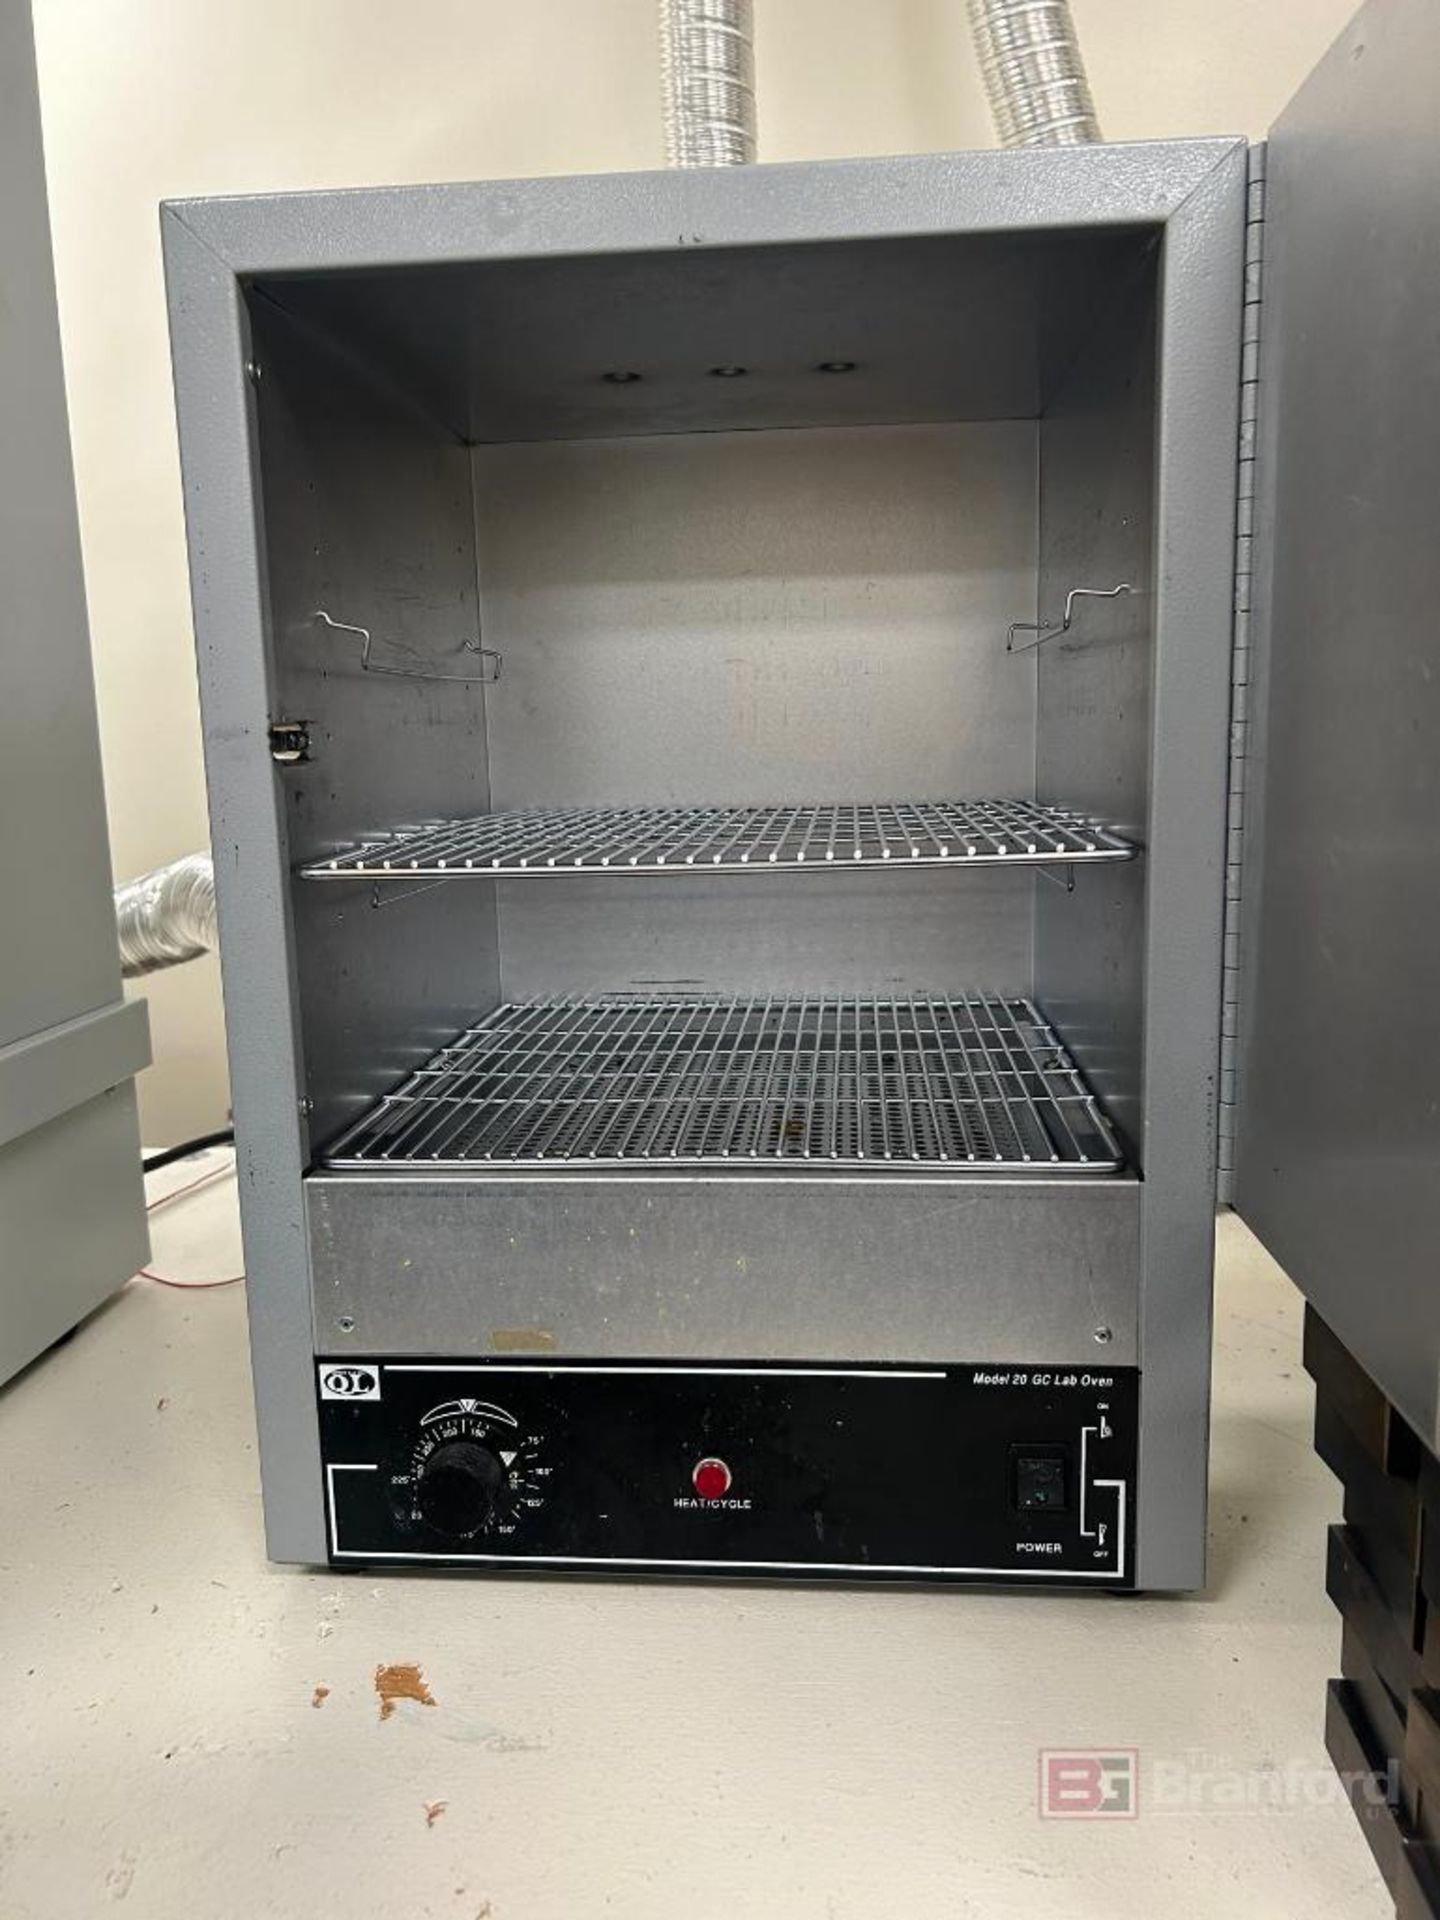 Quincy Labs Model: 20GC Bake Oven - Image 2 of 2